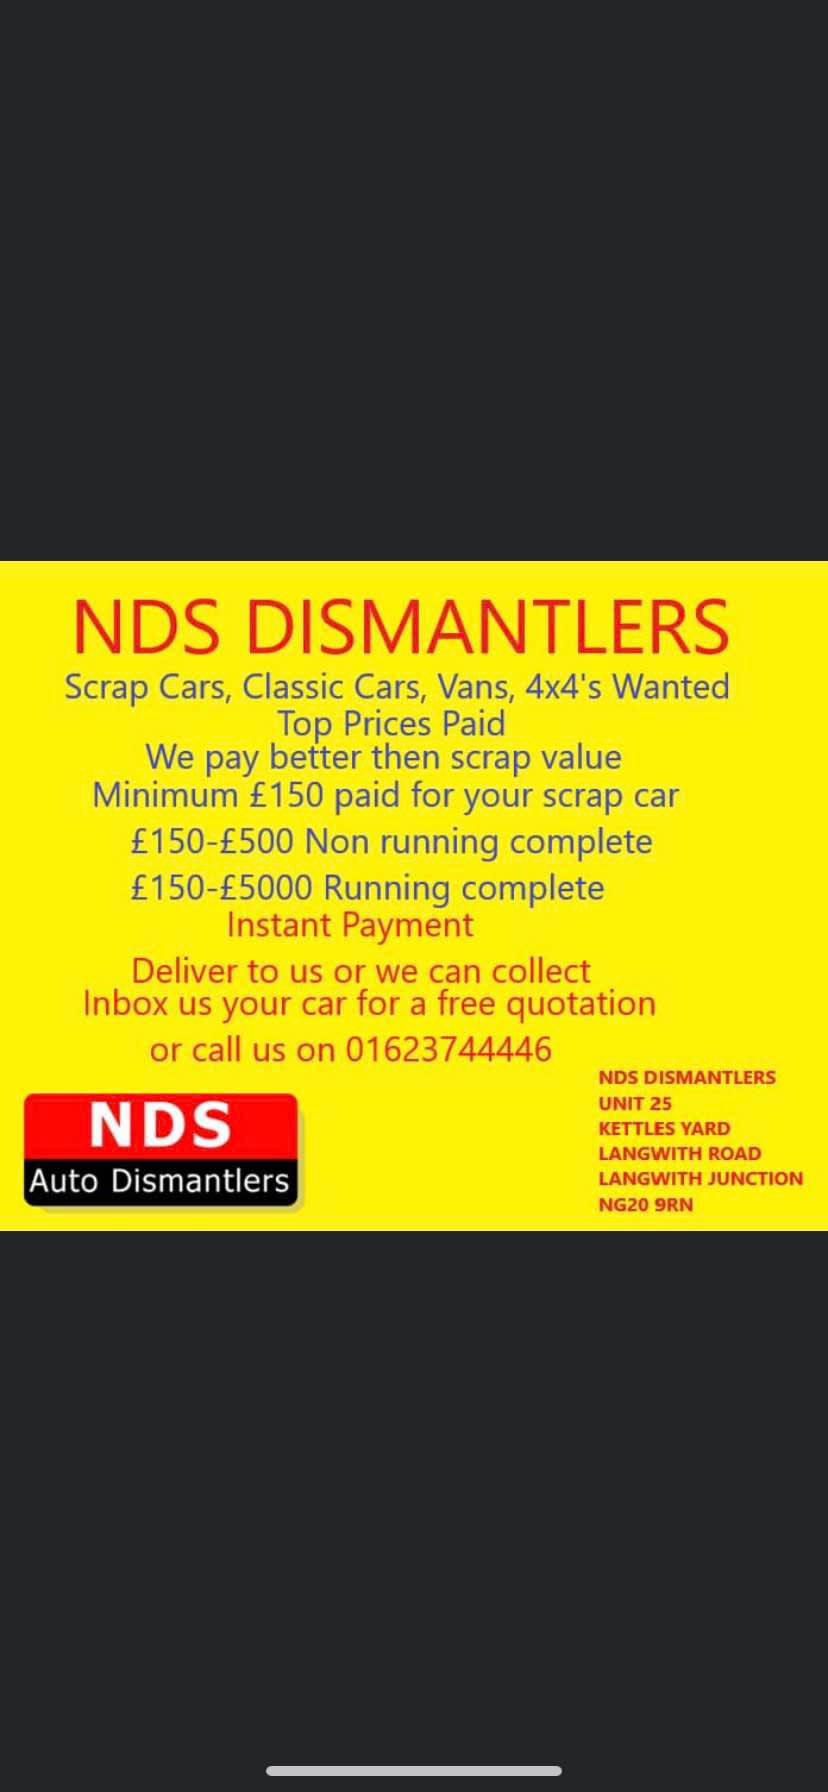 N D S Auto Dismantlers Mansfield 01623 744446